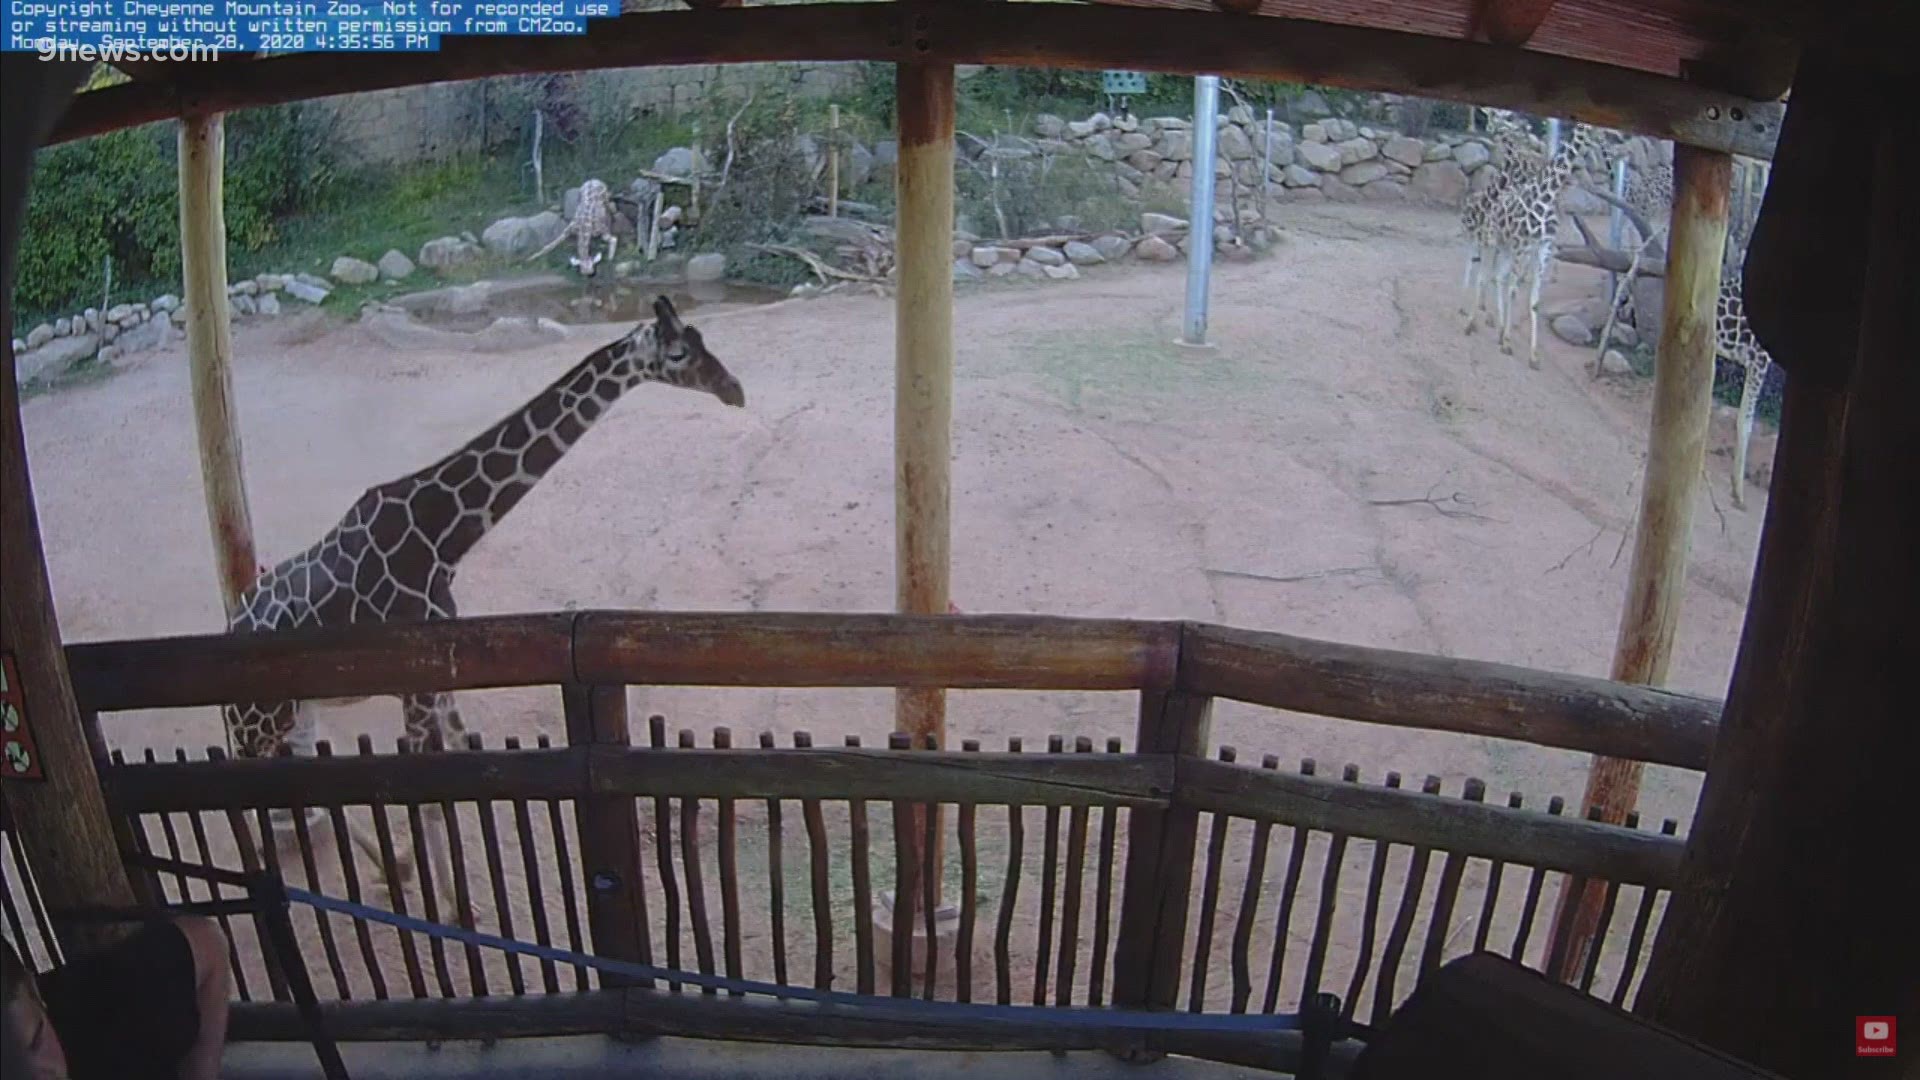 Watch Bailey and her calf live in a YouTube stream provided by Cheyenne Mountain Zoo.